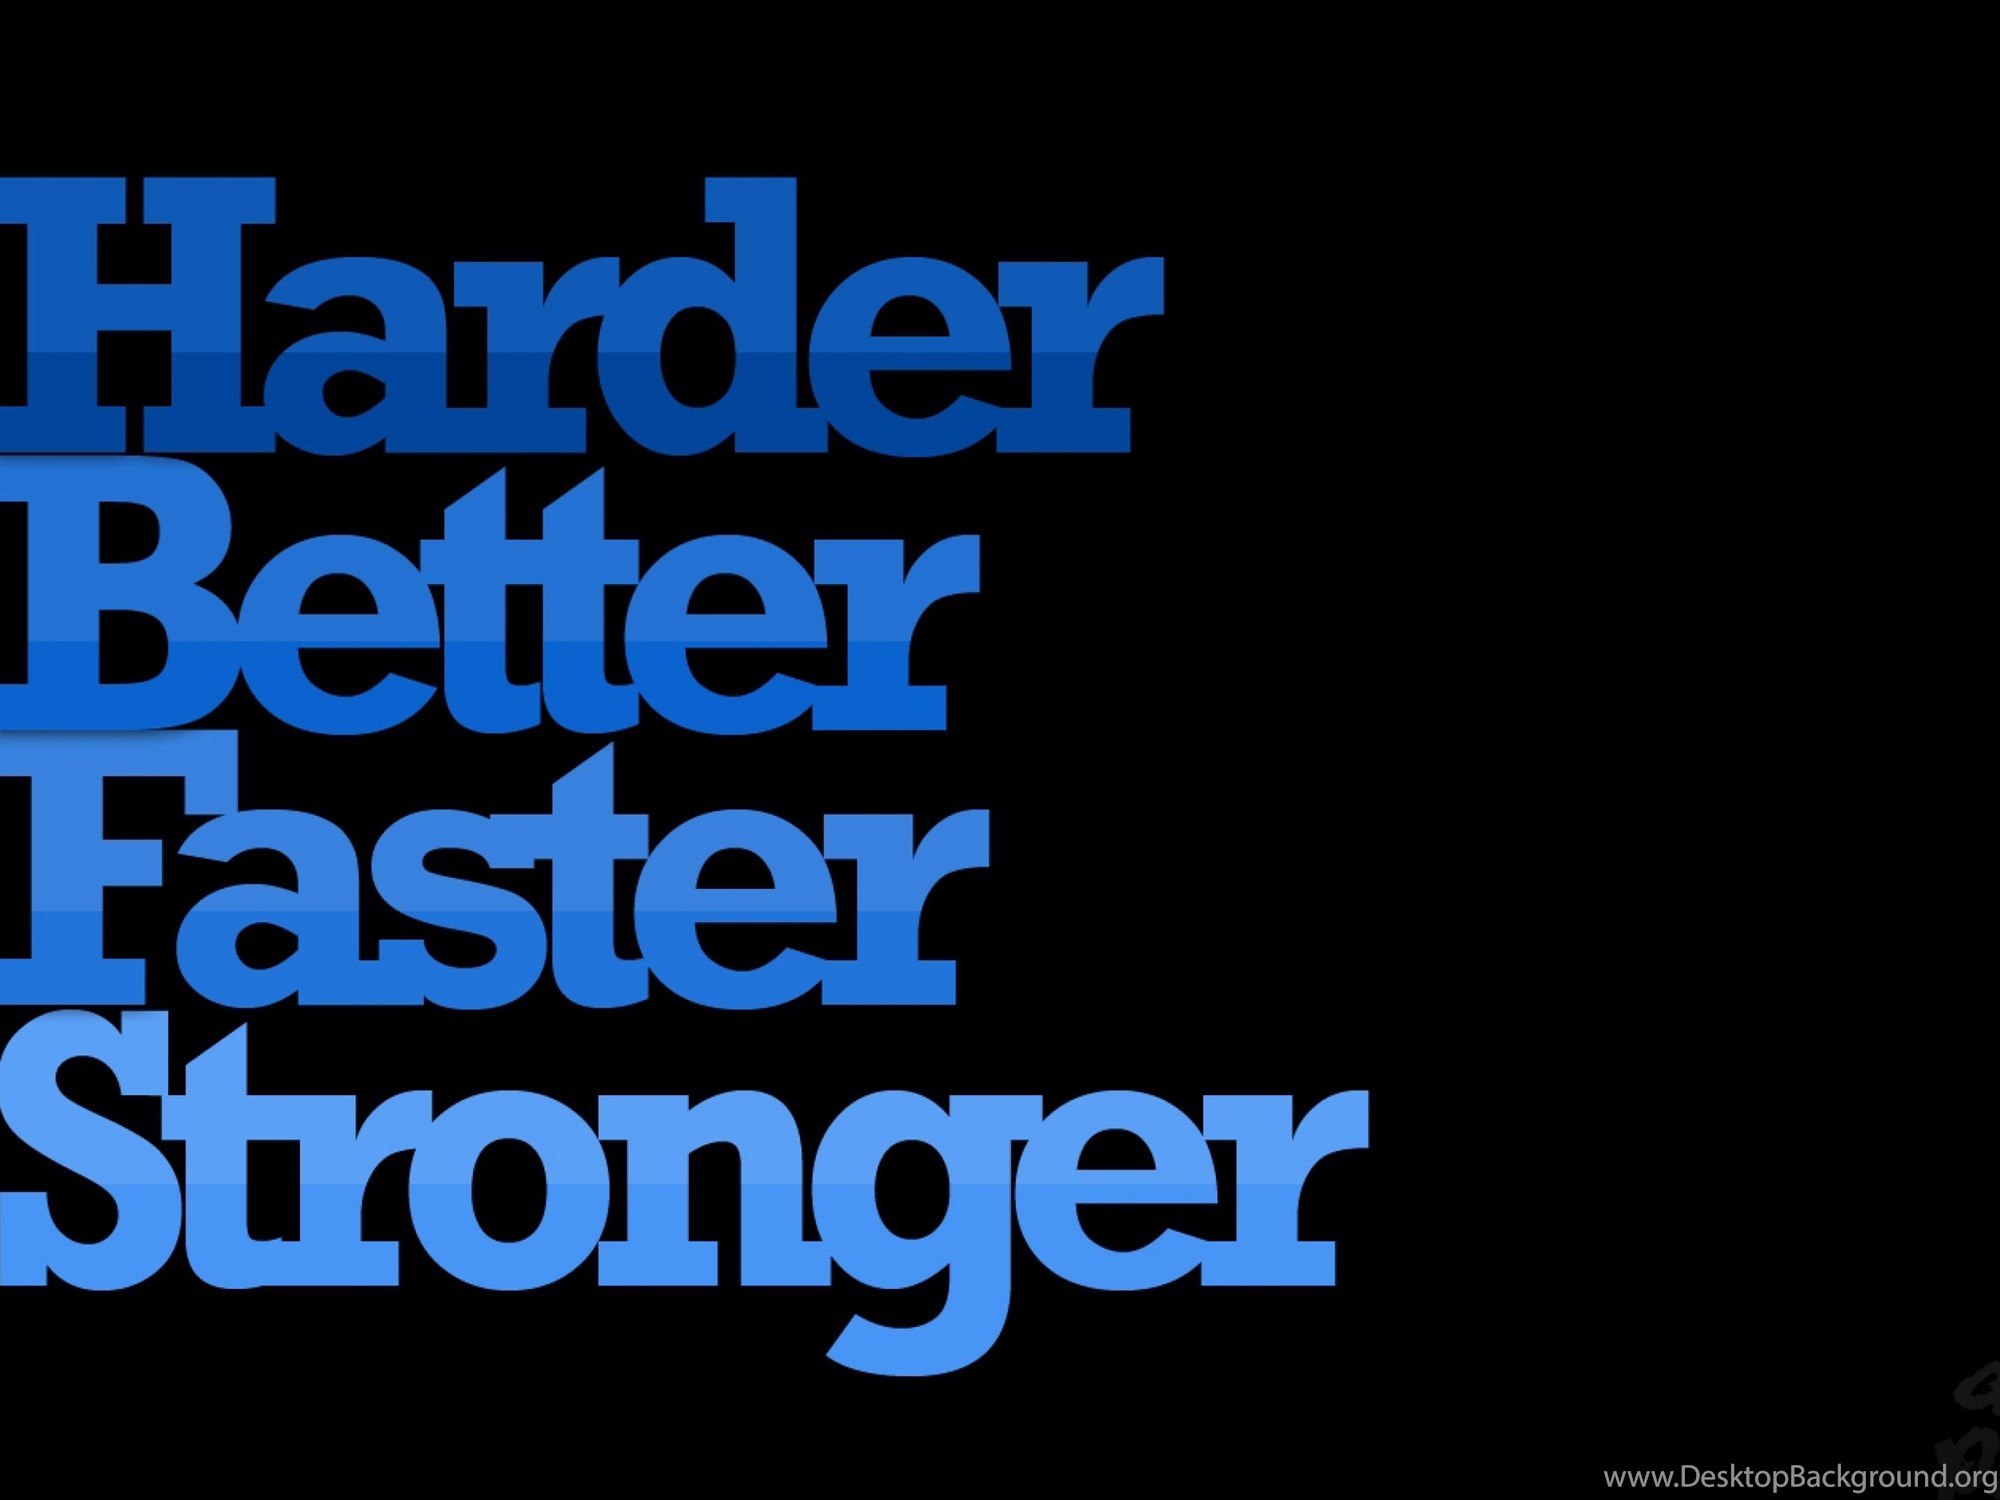 Включи faster and harder. Harder better faster stronger. Harder better faster stronger обложка. Фирма better faster.